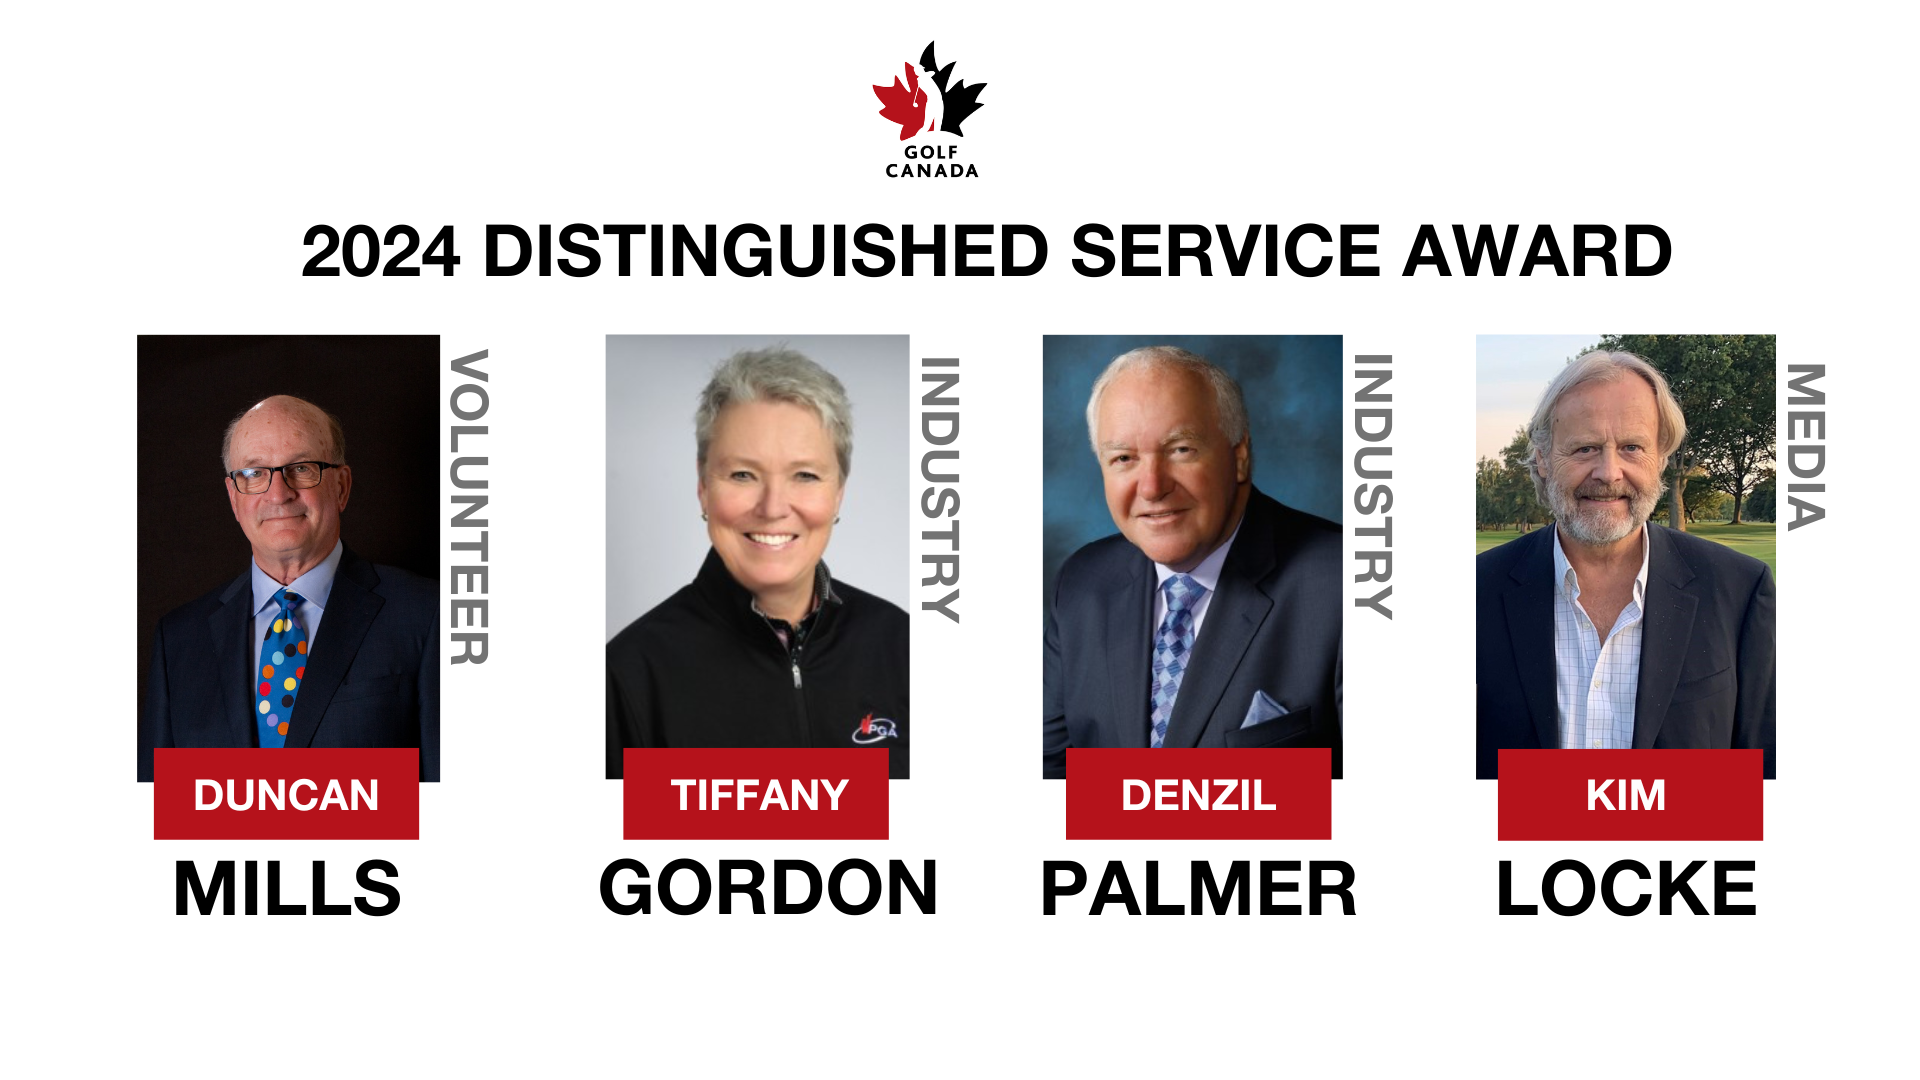 Golf Canada recognizes Duncan Mills, Tiffany Gordon, the late Denzil Palmer and Kim Locke with 2024 Distinguished Service Awards